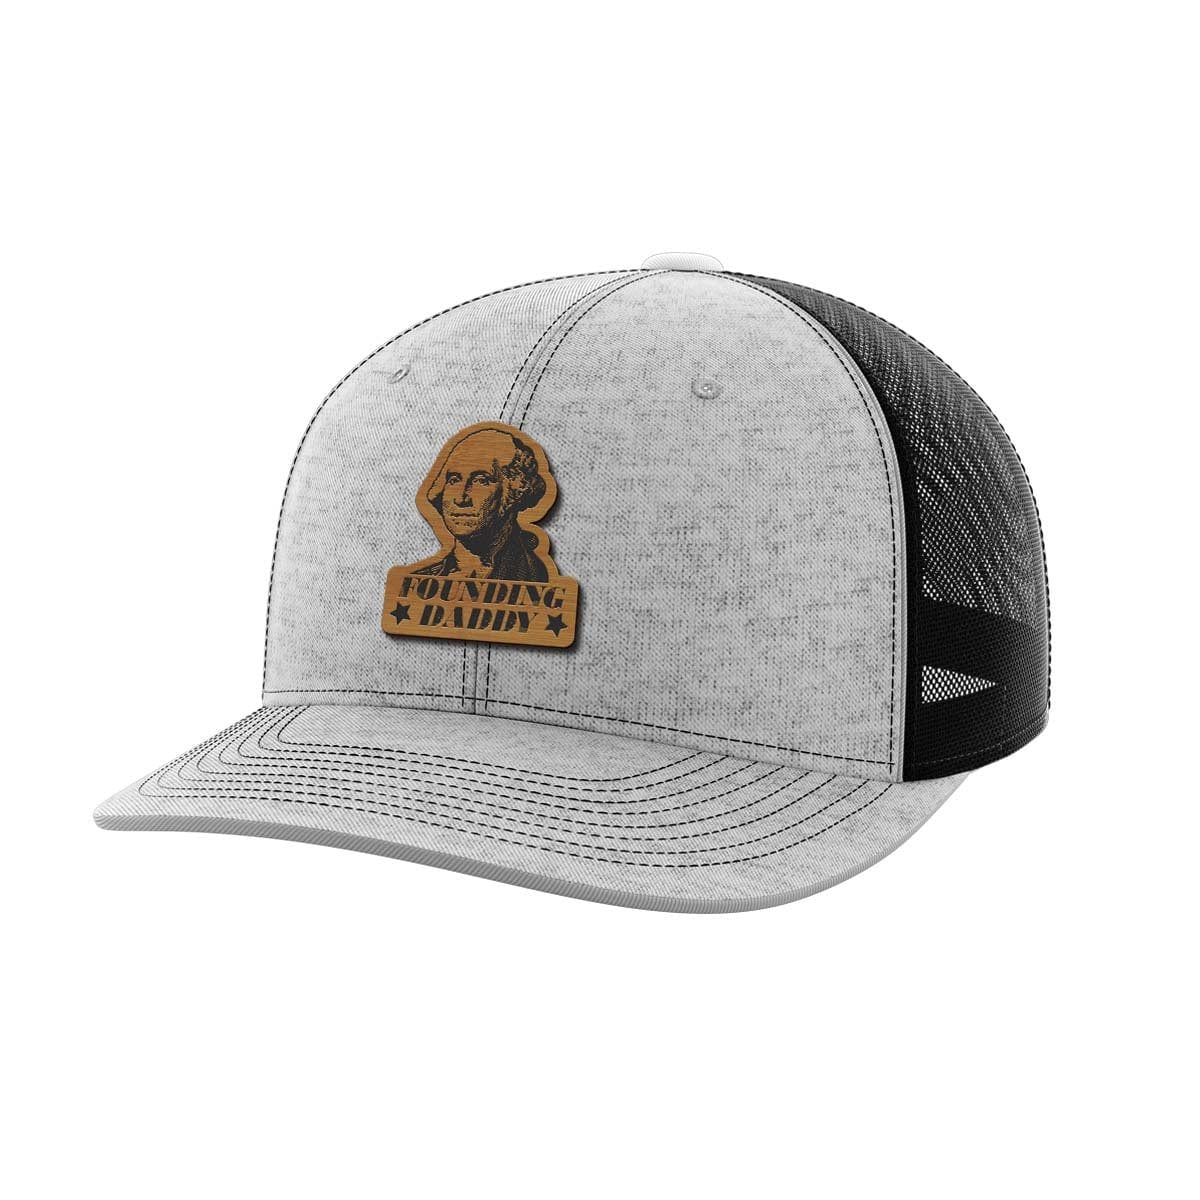 Founding Daddy Bamboo Patch Hat - Greater Half